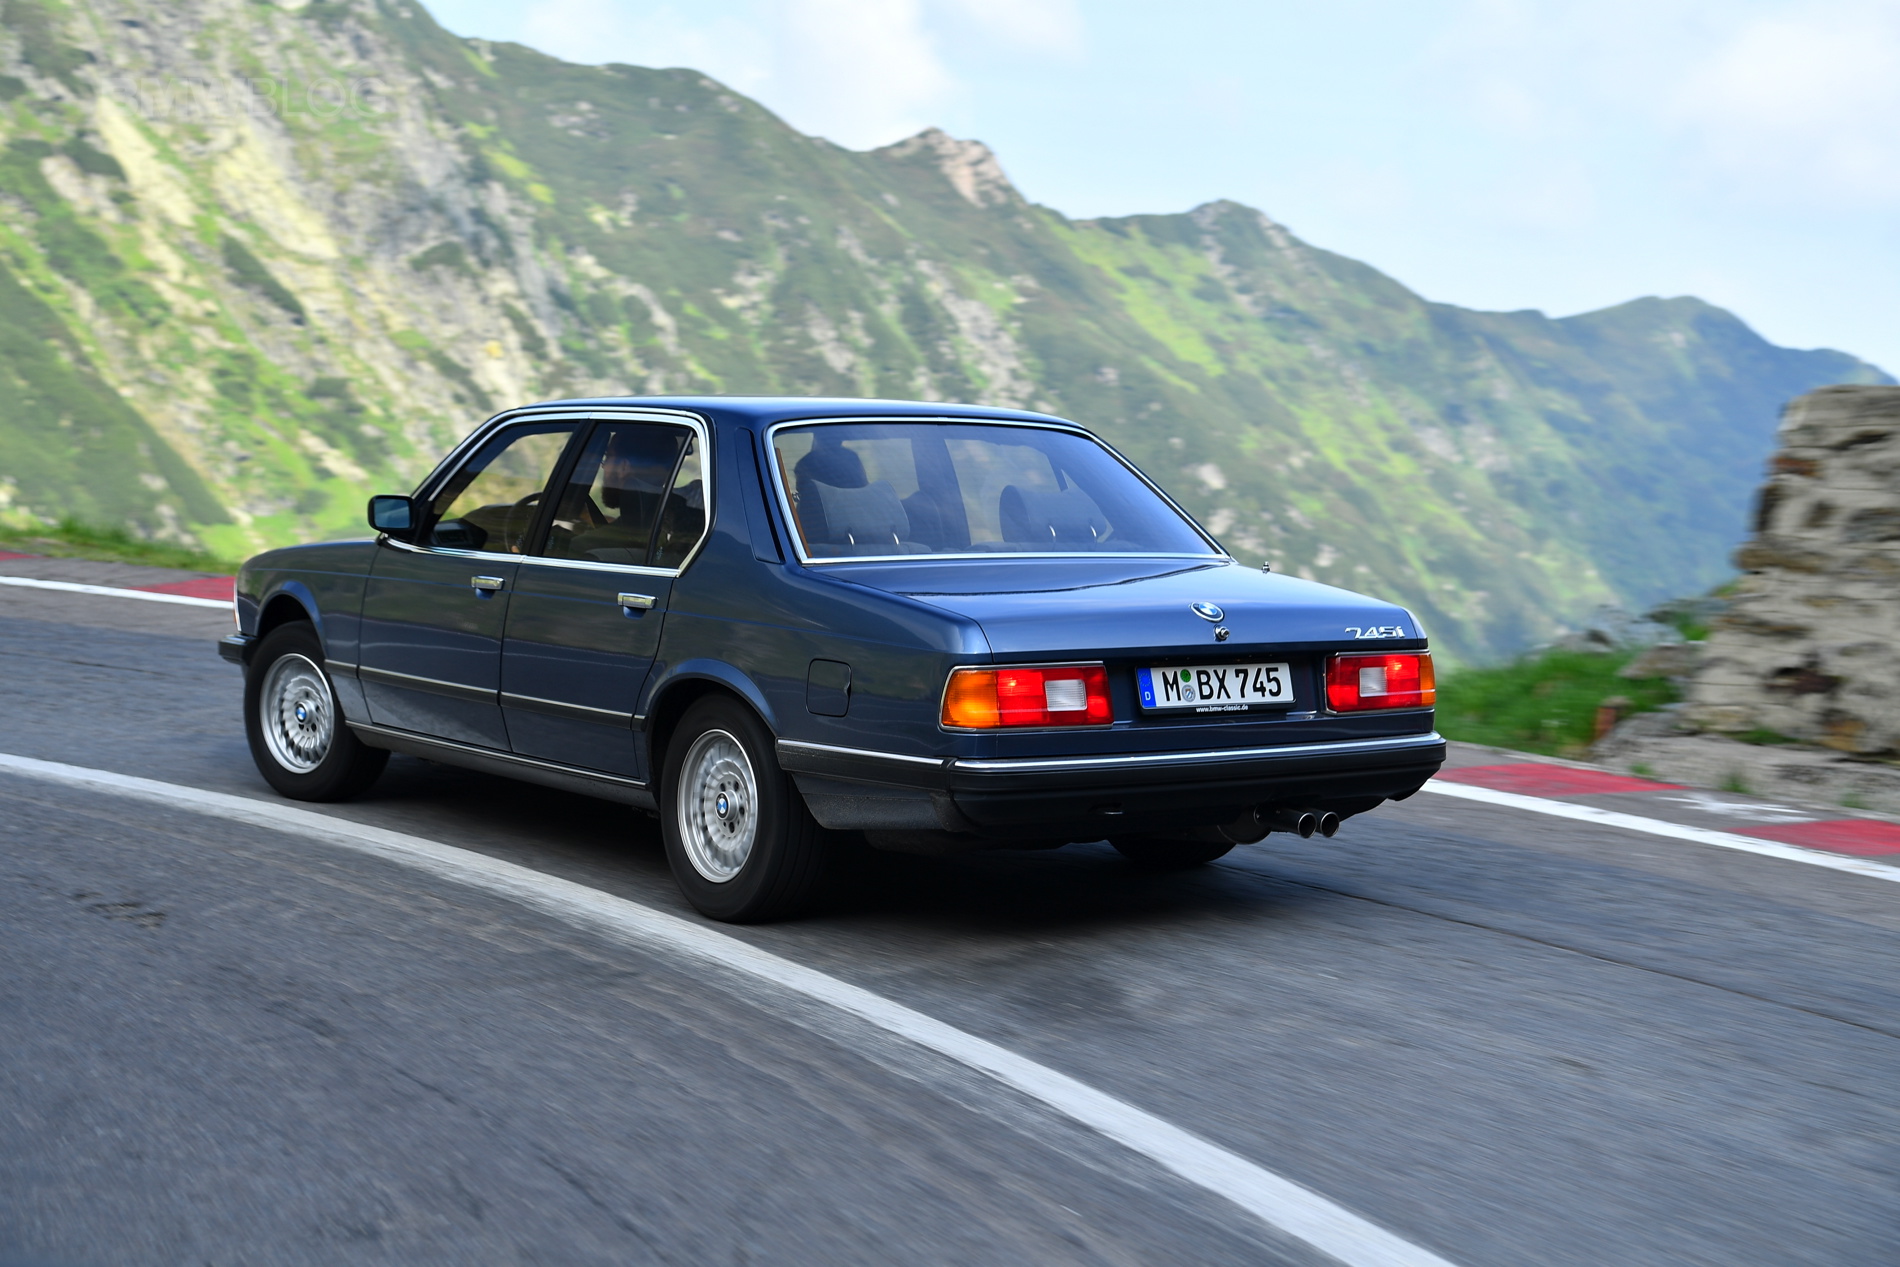 BMW E23 7 Series conquers the land of Dracula